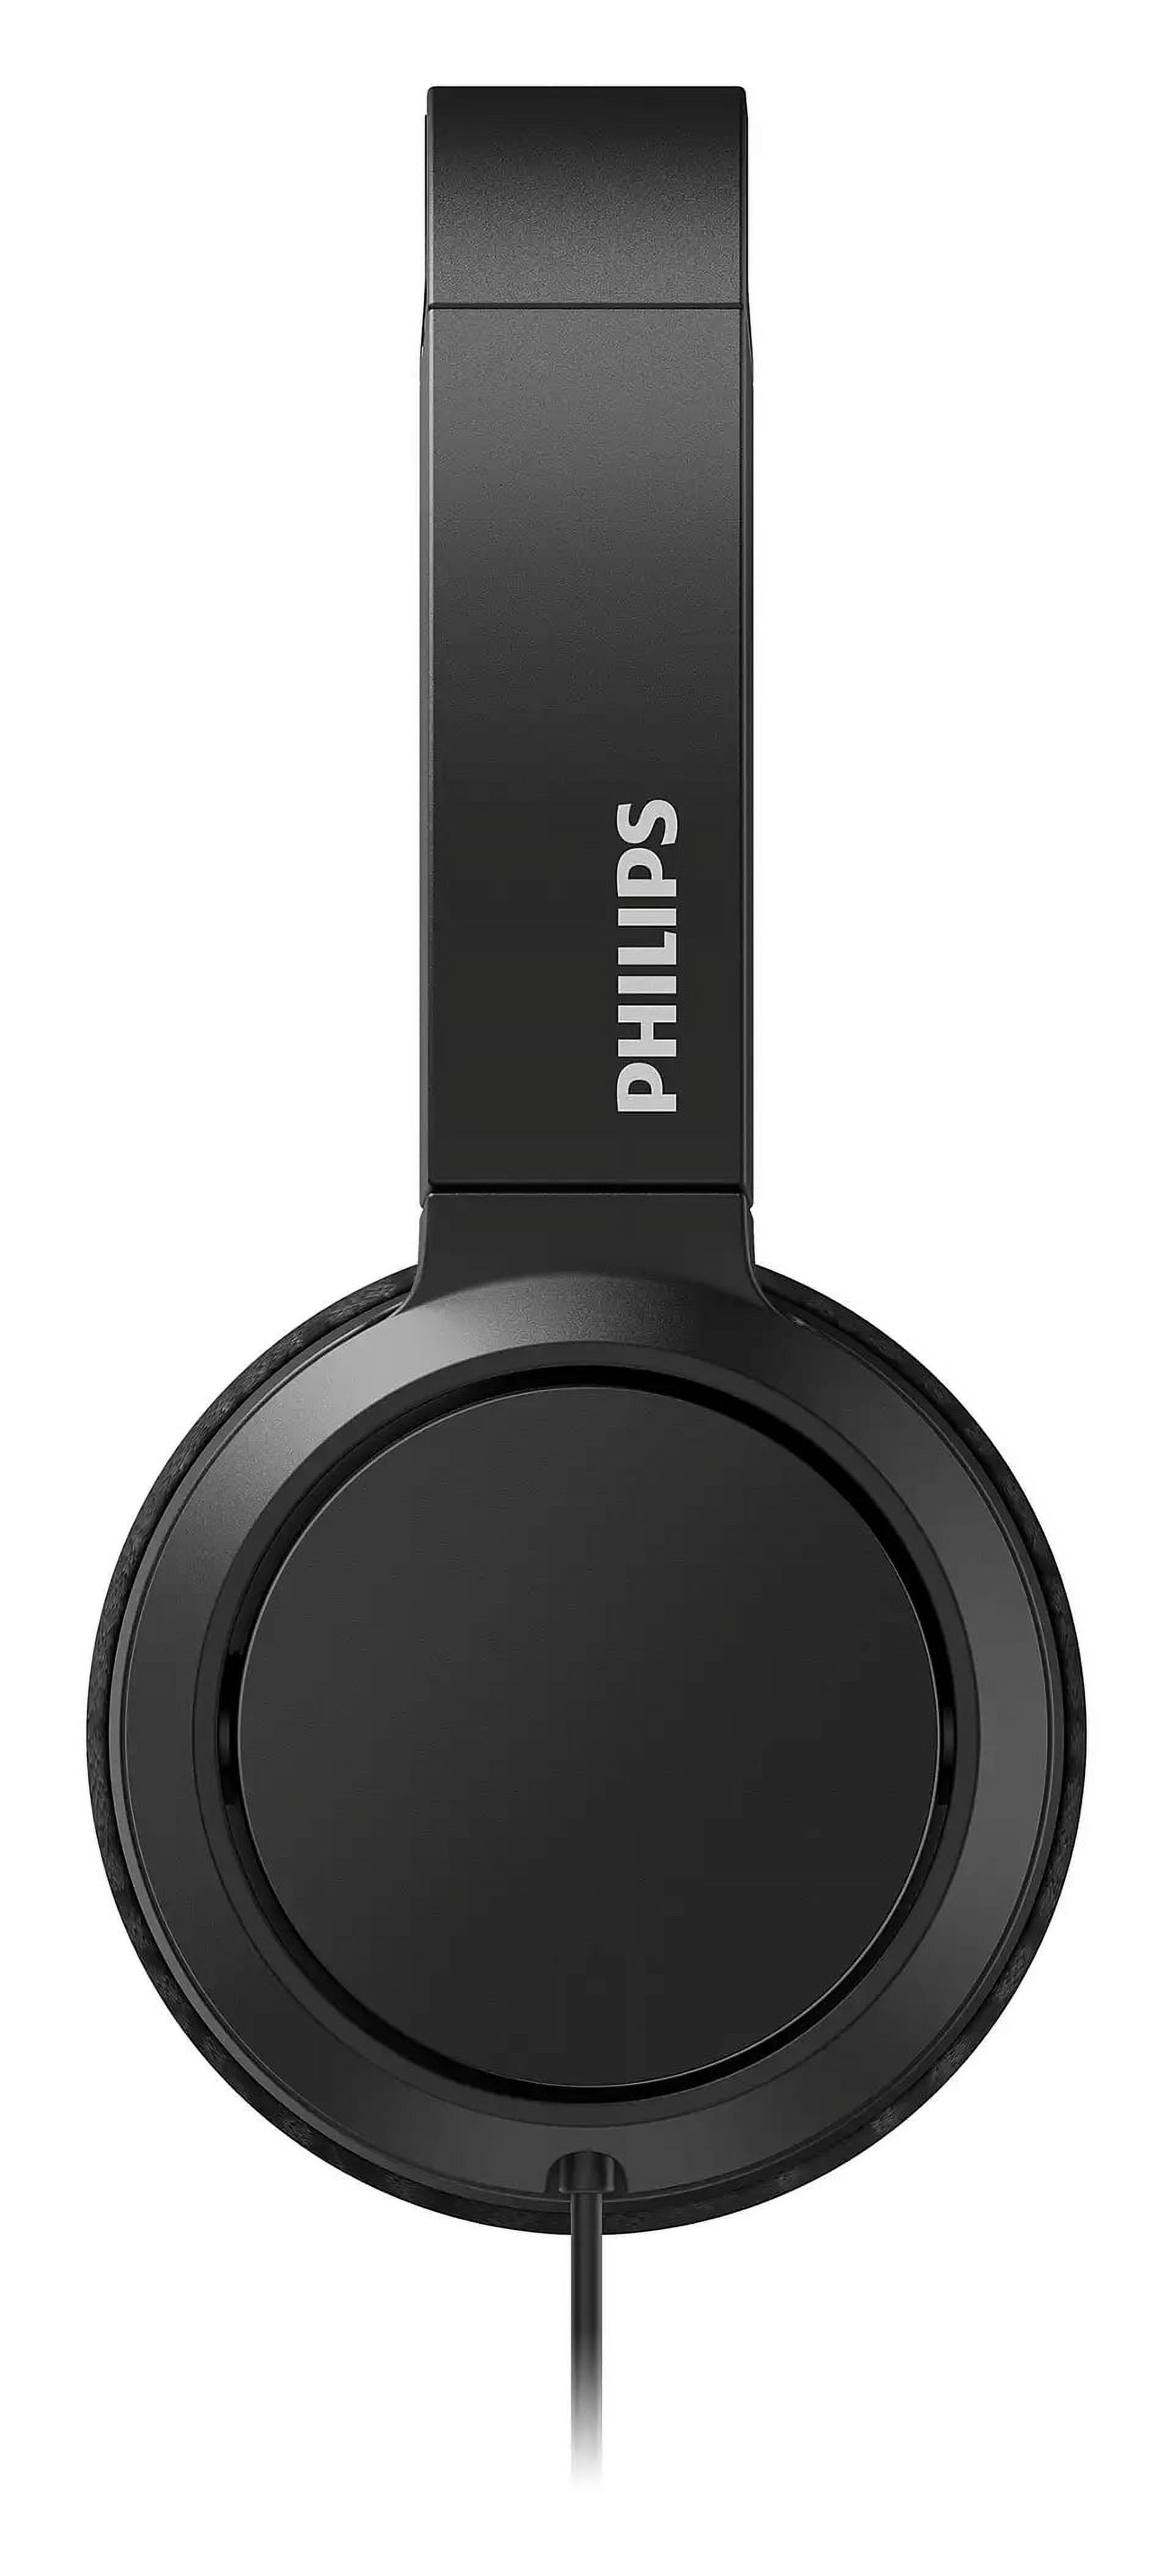 Philips Audio On-Ear Headphones TAH4105BK/00 with Microphone (In-Line Remote Control, Flat Folding, Angled Jack, Padded Headband, Noise Isolating) Black – 2020/2021 Model - image 3 of 5